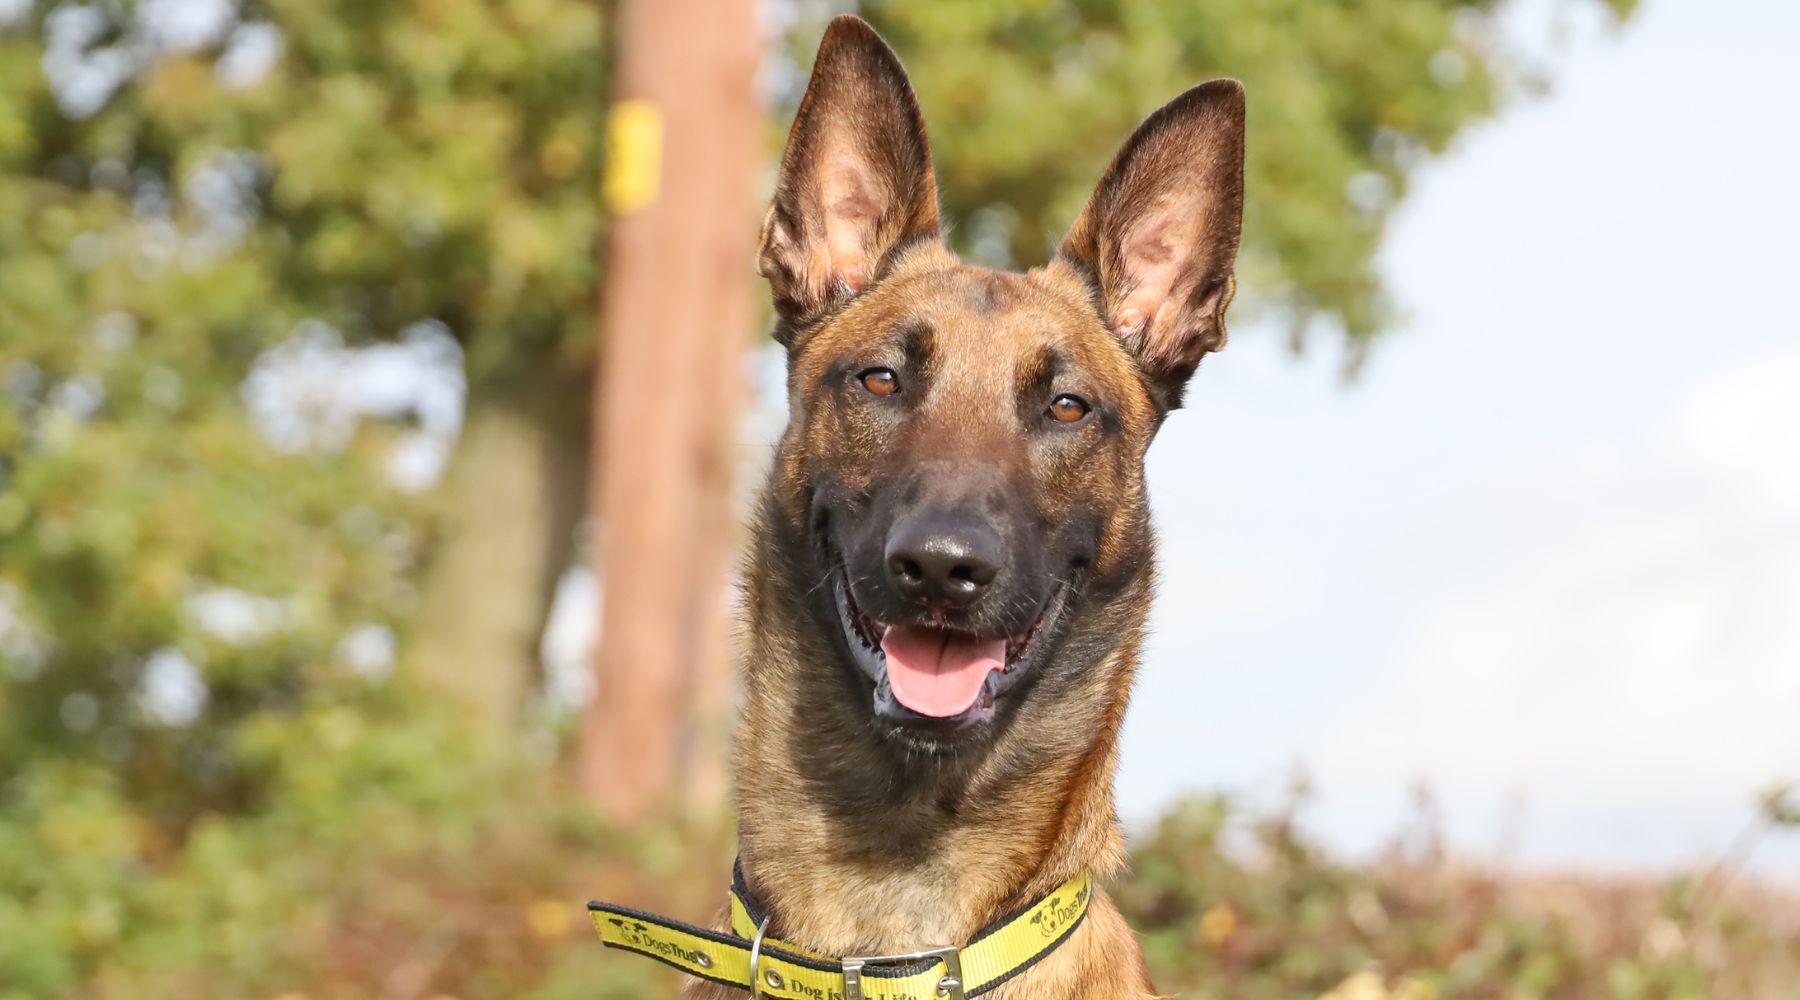 Omaze Million Pound House Lake District - Dogs Trust - Piper's Story - A Belgian Malinois stands in the sun, ears pricked